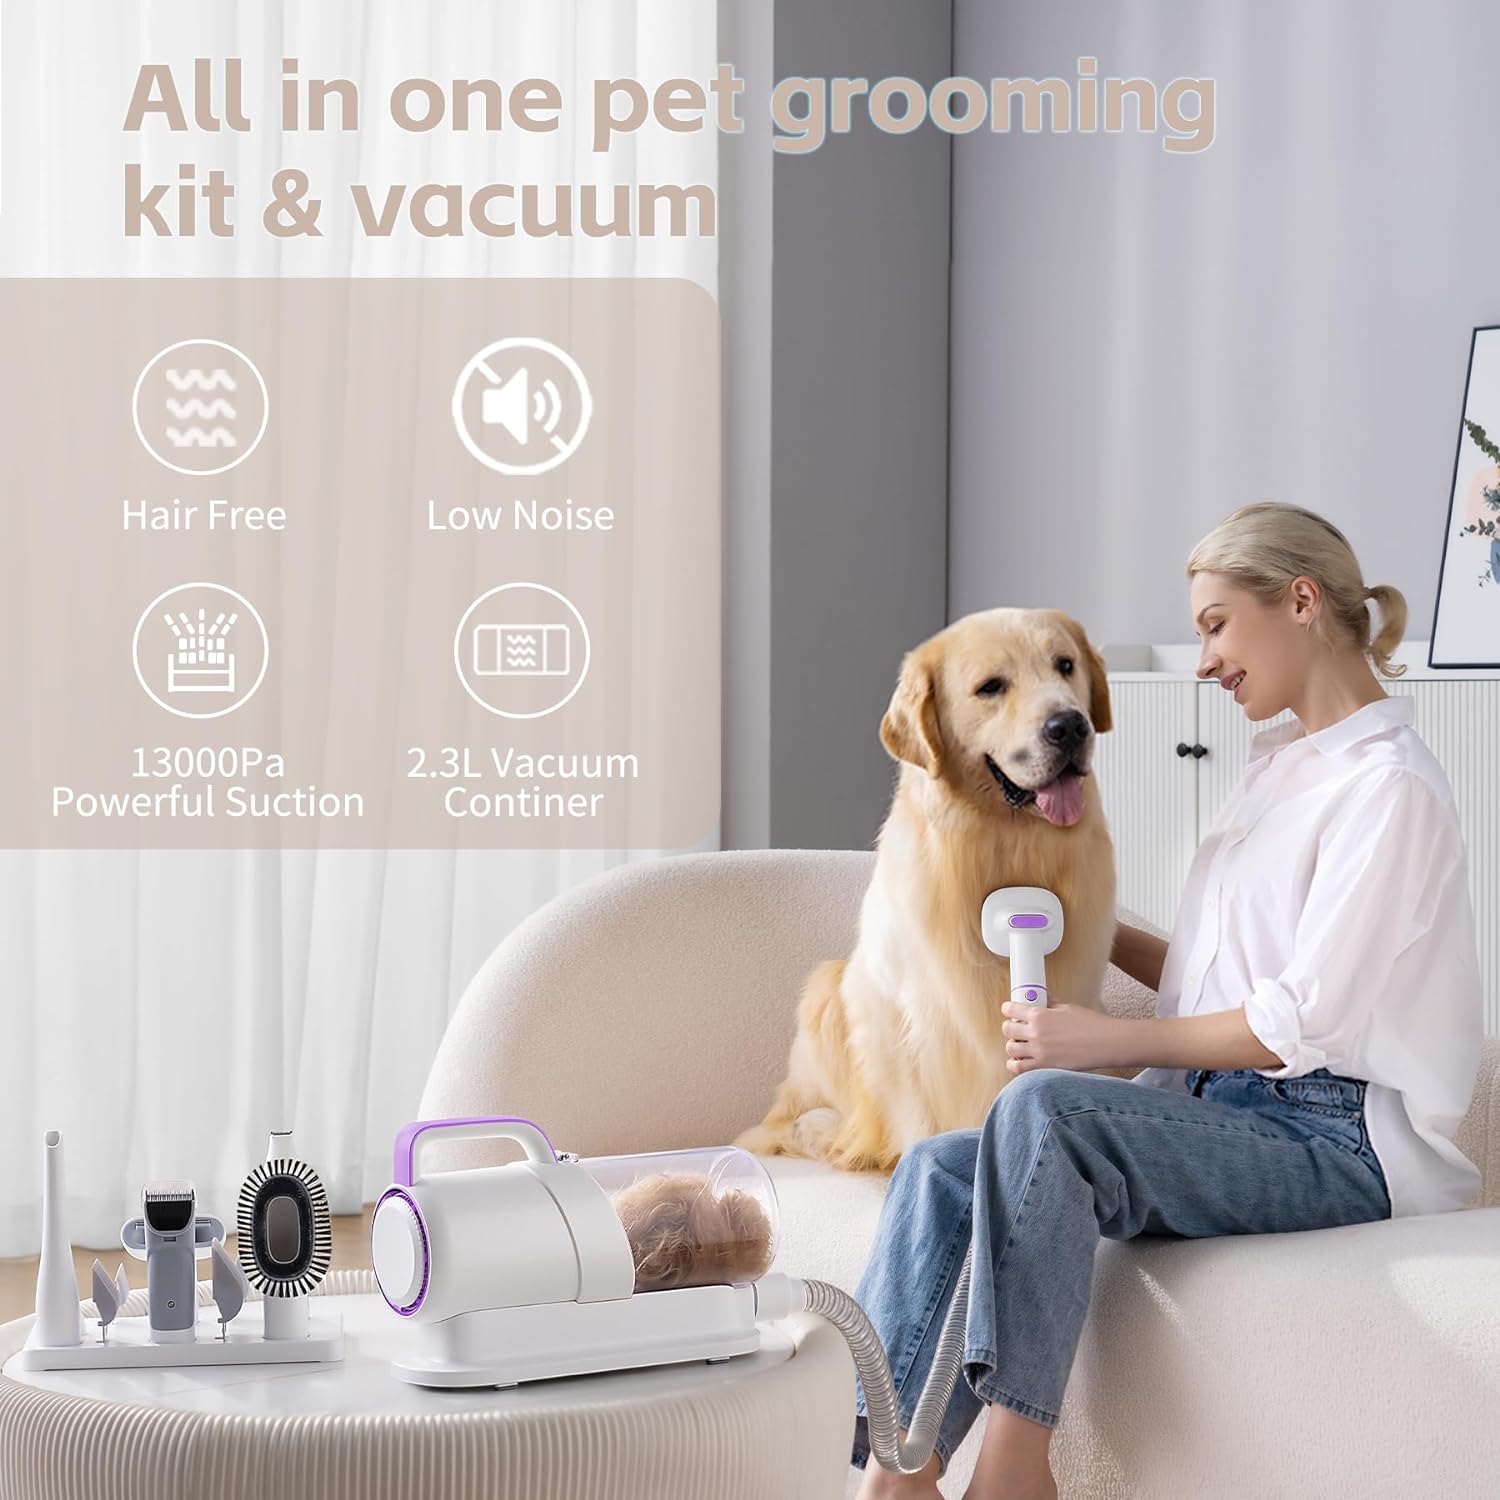 You are currently viewing Pet Clipper Grooming & Pet Grooming Vacuum Kit Review